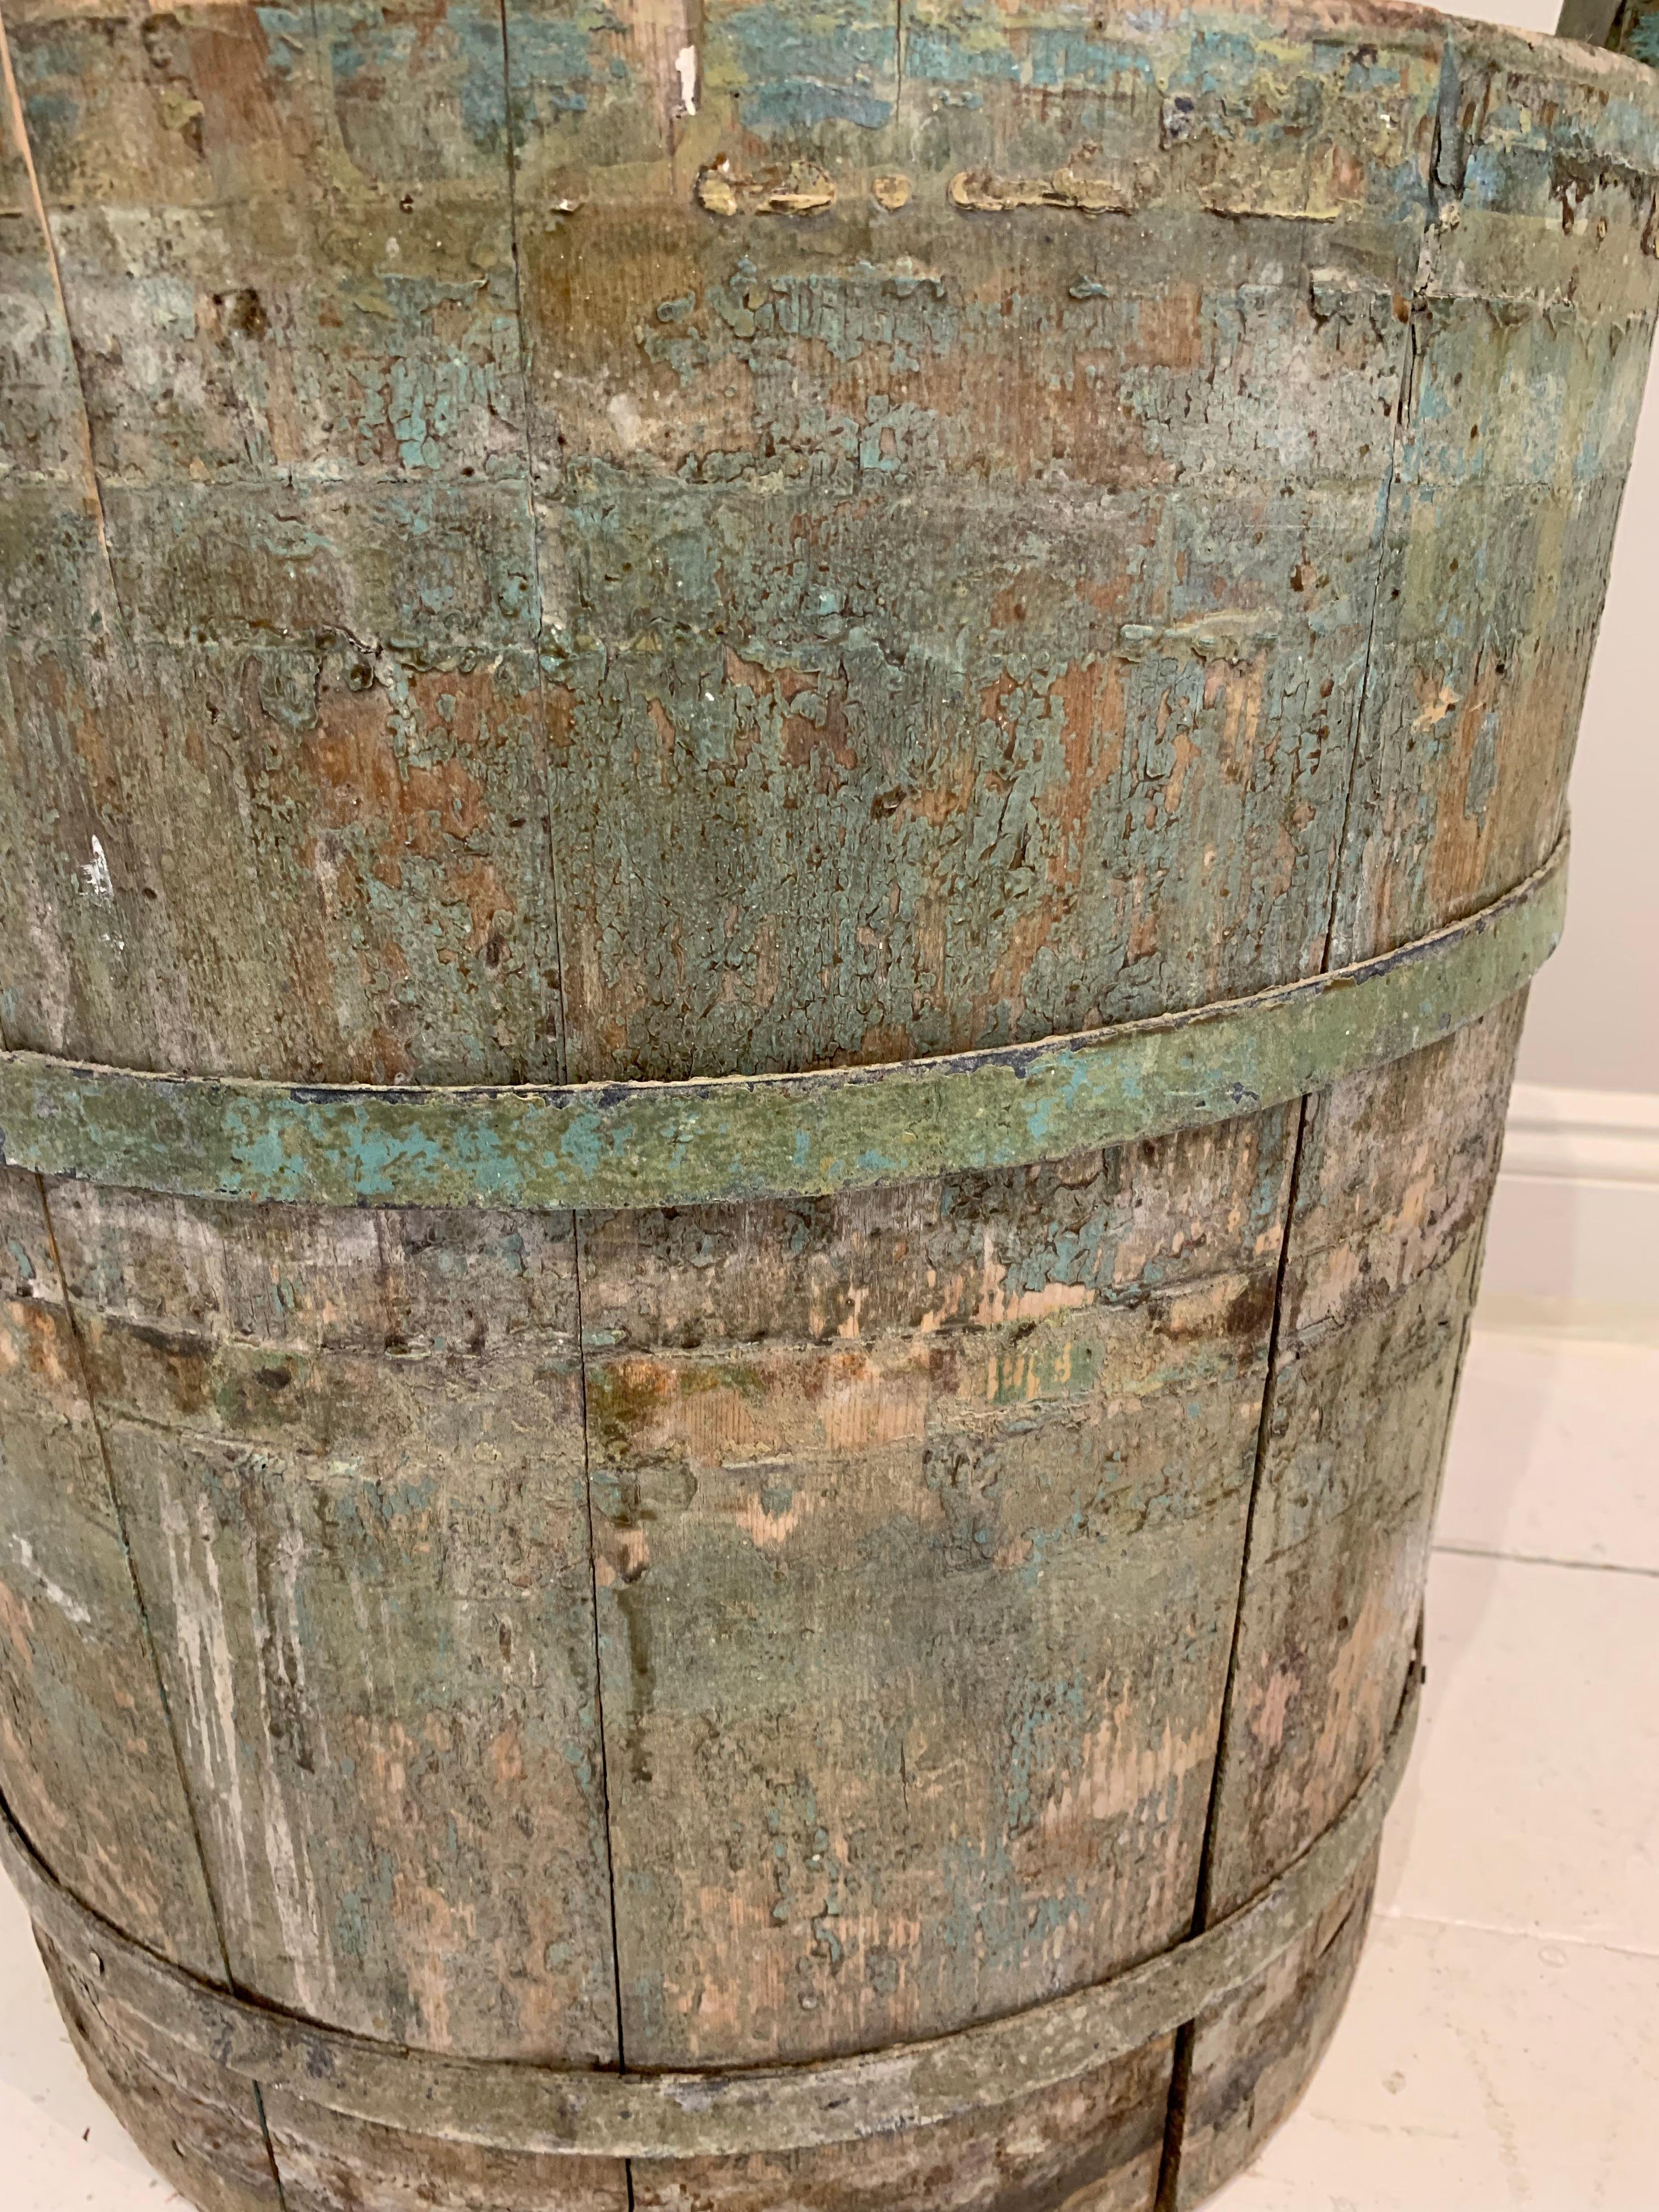 An 18th century Northern Sweden rustic painted decorative handled barrel retaining its wonderful original green colour with contrasting natural unpainted wood inside. A beautiful piece perfect as a decorative piece on its own or with a large